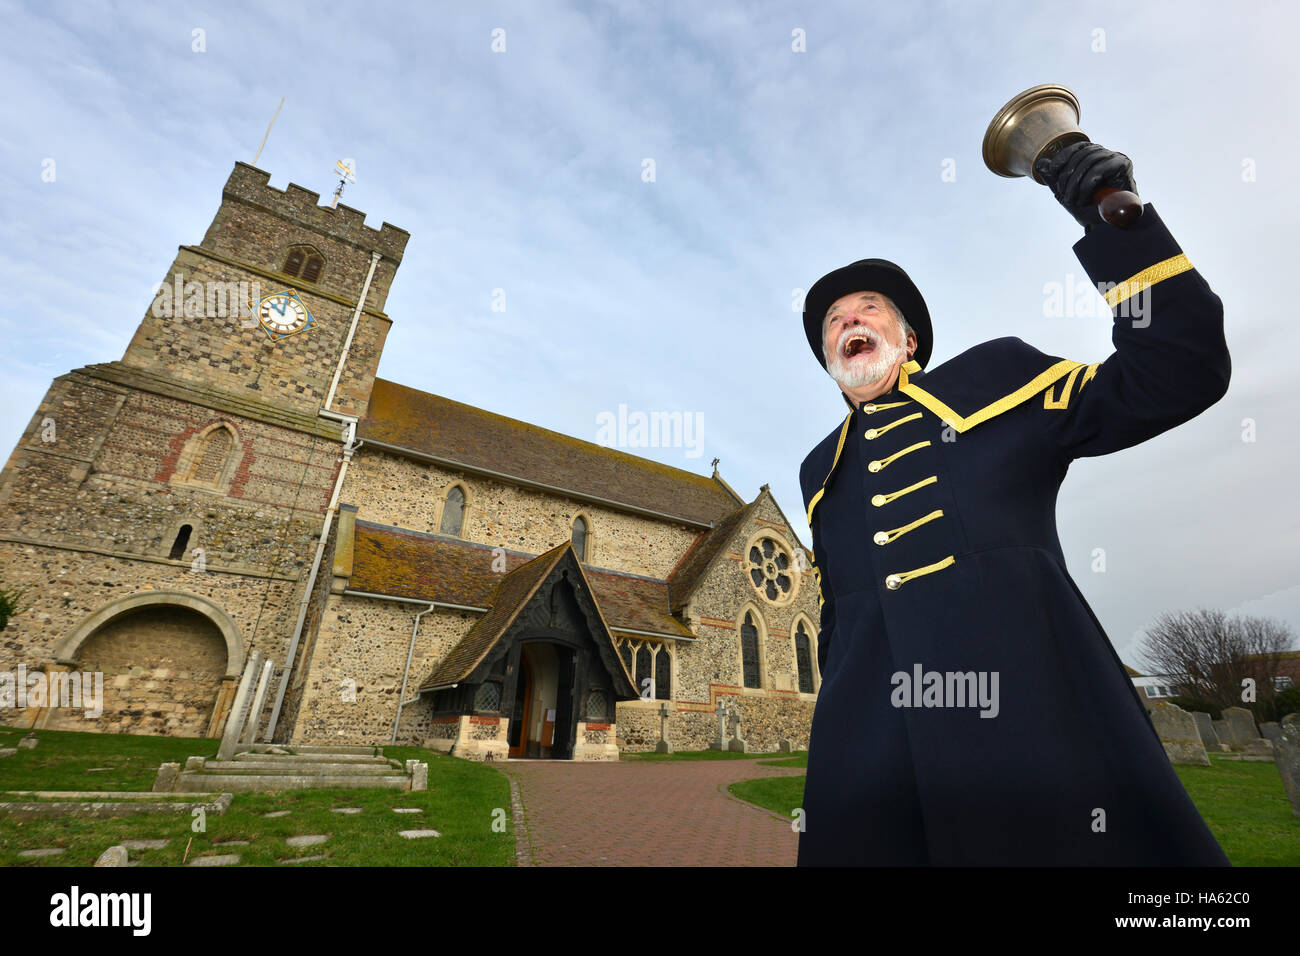 Town crier at work - Peter White from Seaford, been a crier for 40 years Stock Photo